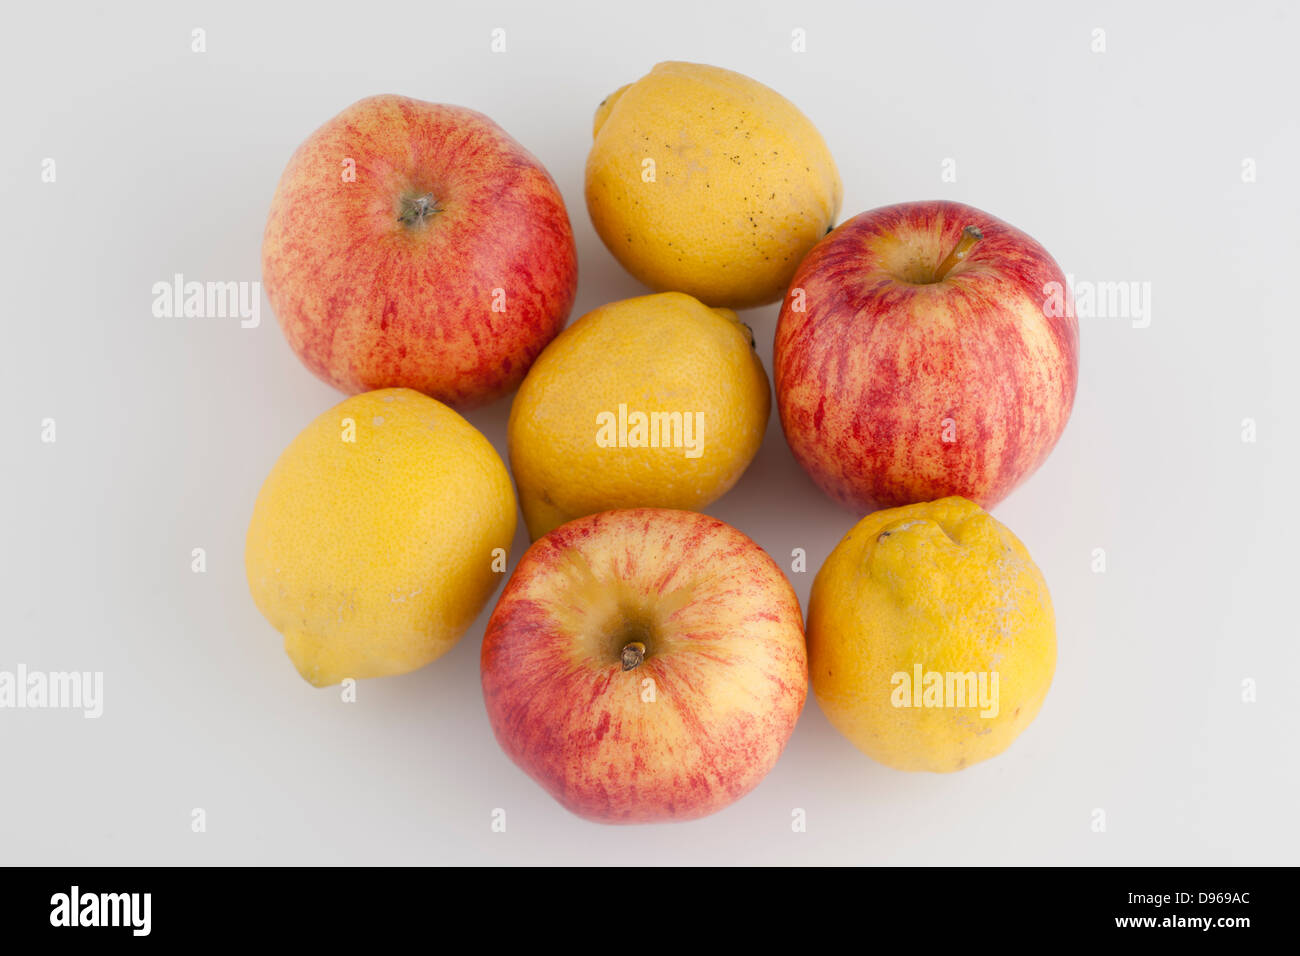 Pile of apples and lemons Stock Photo